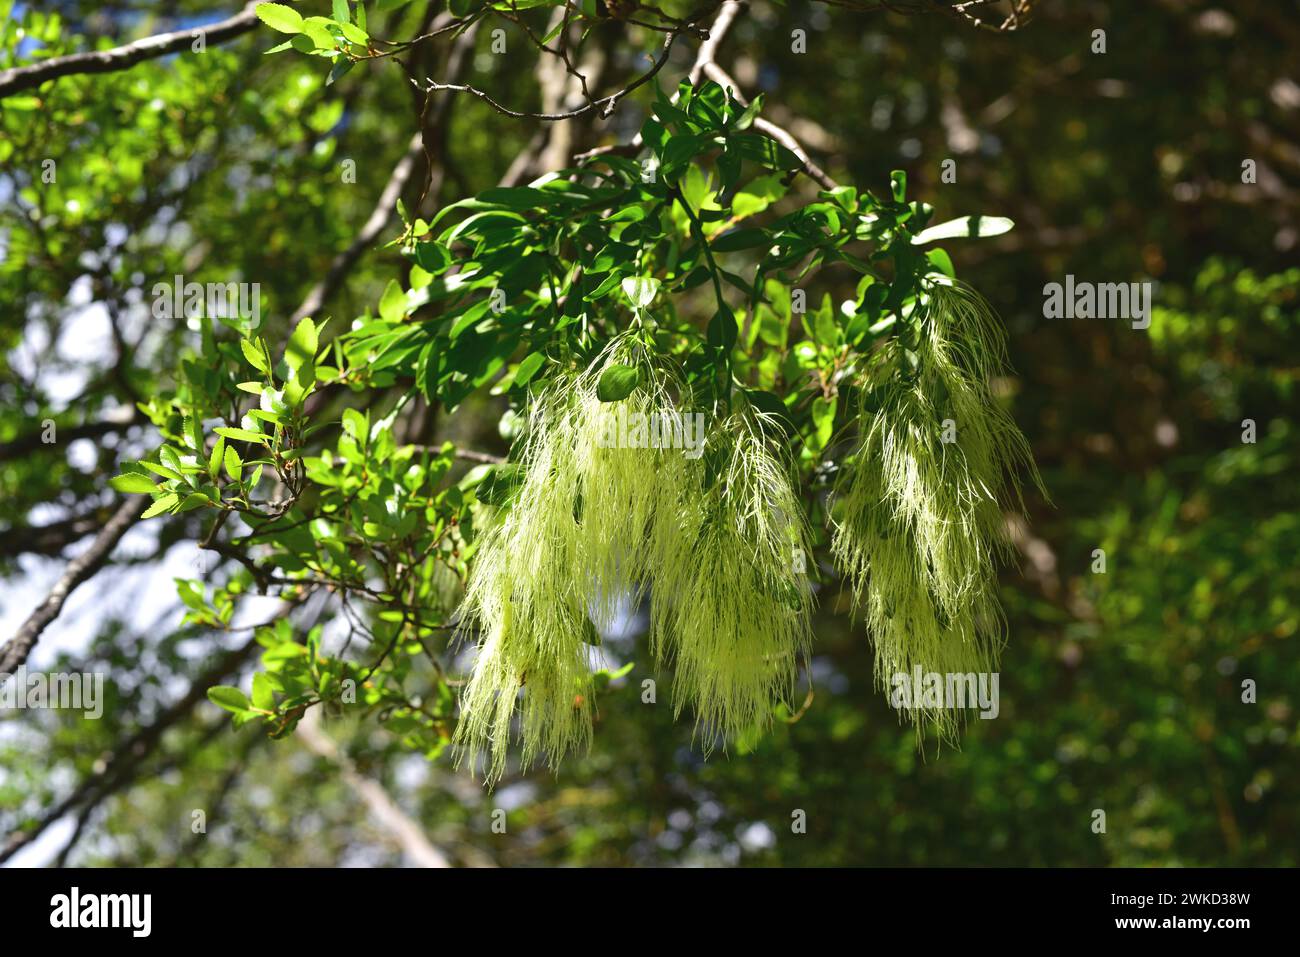 Injerto or feathery mistletoe (Misodendrum linearifolium) is an hemiparasitic plant native to central and southern Chile and southwestern Argentina. T Stock Photo